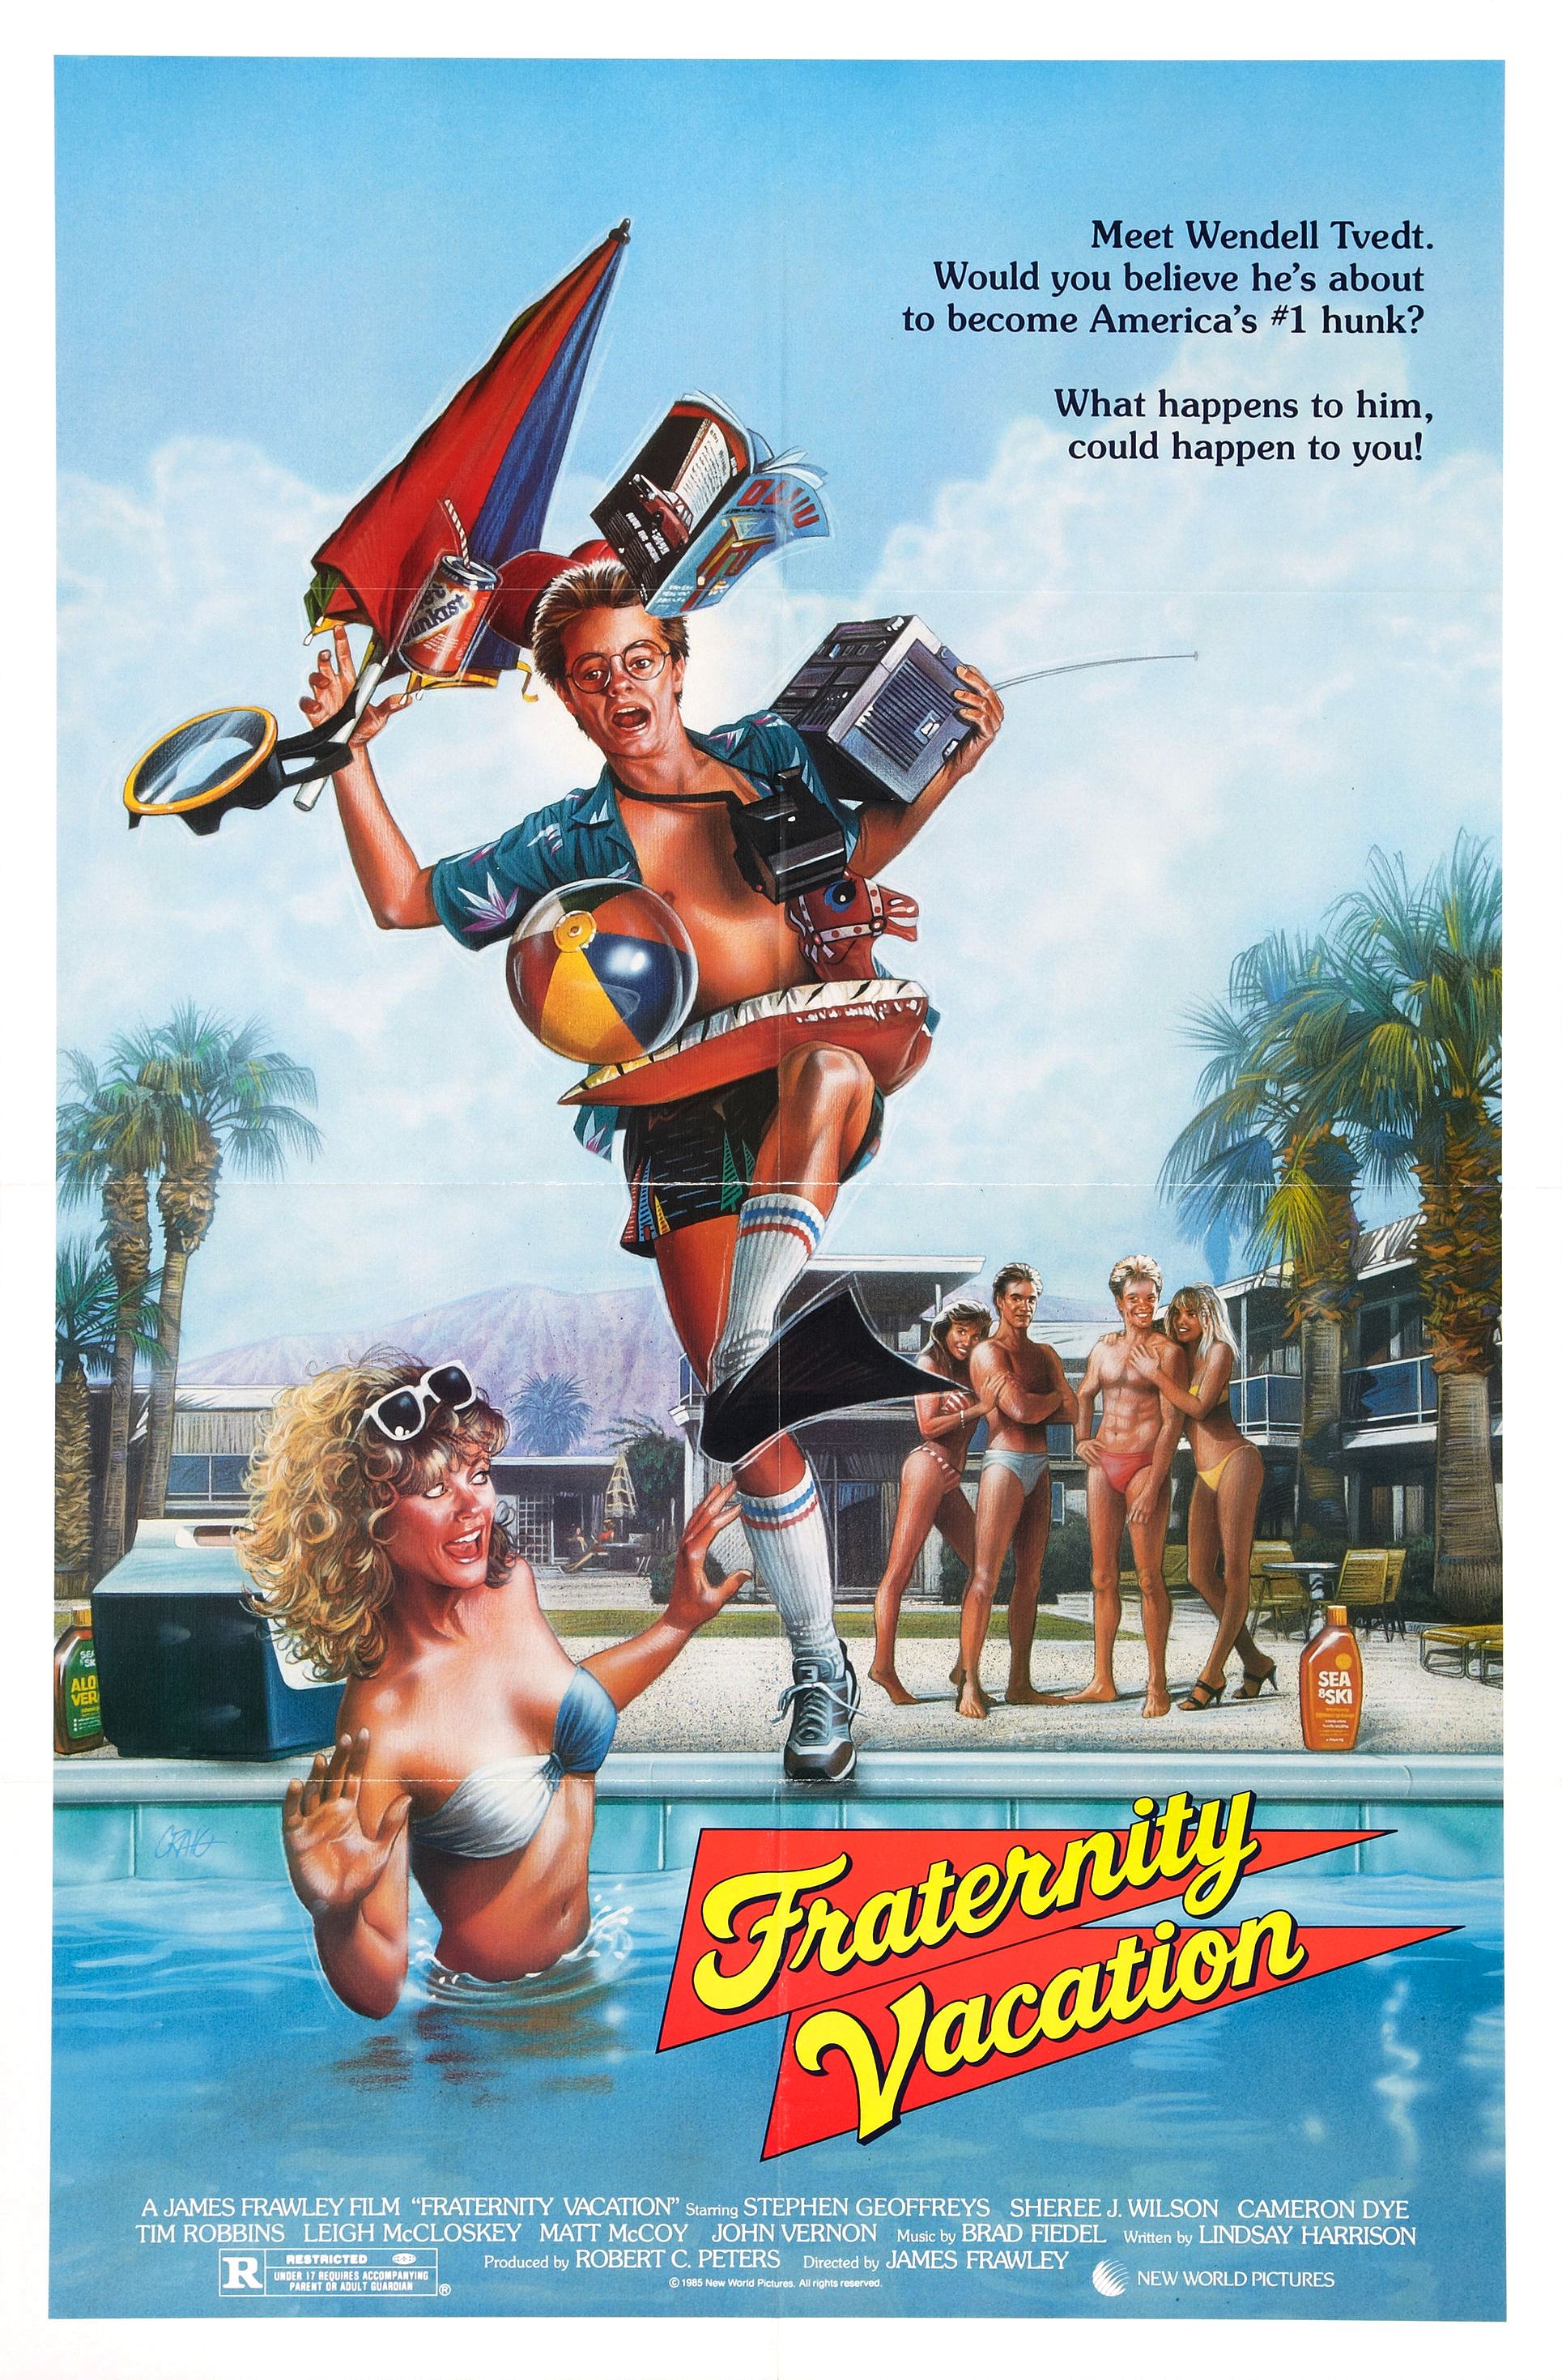 fraternity vacation movie poster - Meet Wendel Tvede. Would you believe he's about to become America's 1 hunk? What happens to him, could happen to you! Fraternity Vacation Rec